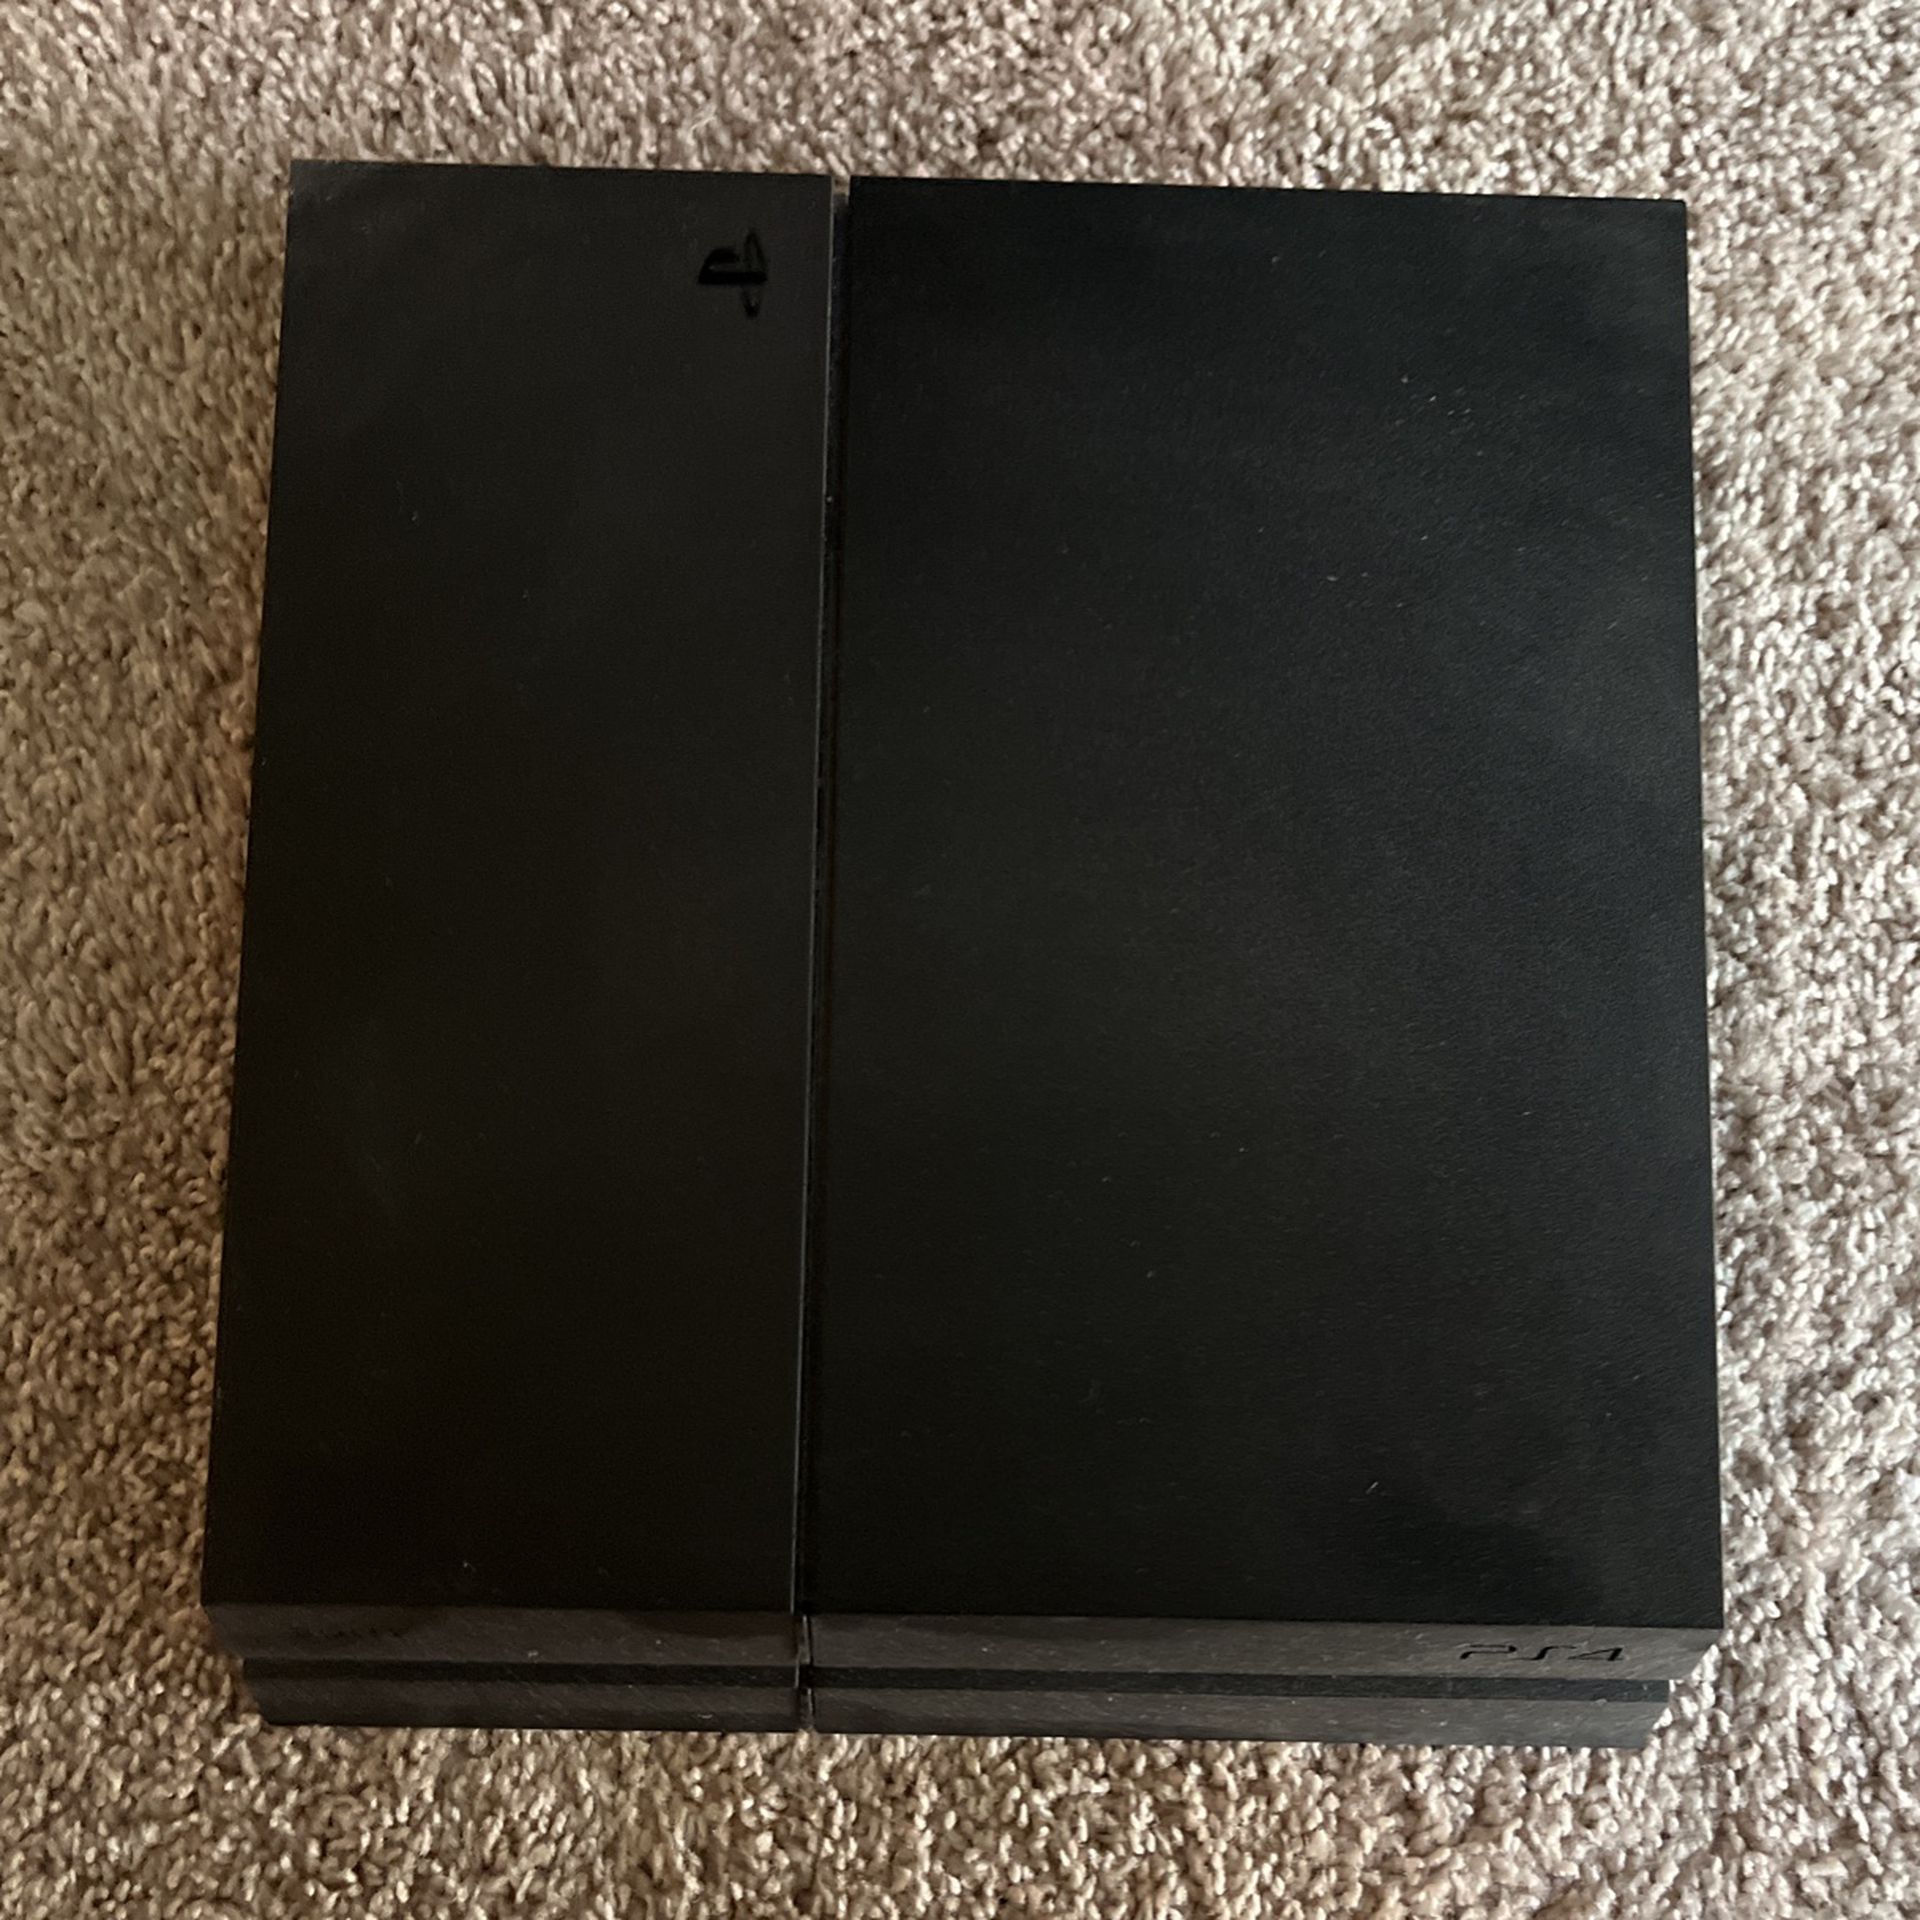 PlayStation 4 (PS4) 500GB With Two Controllers